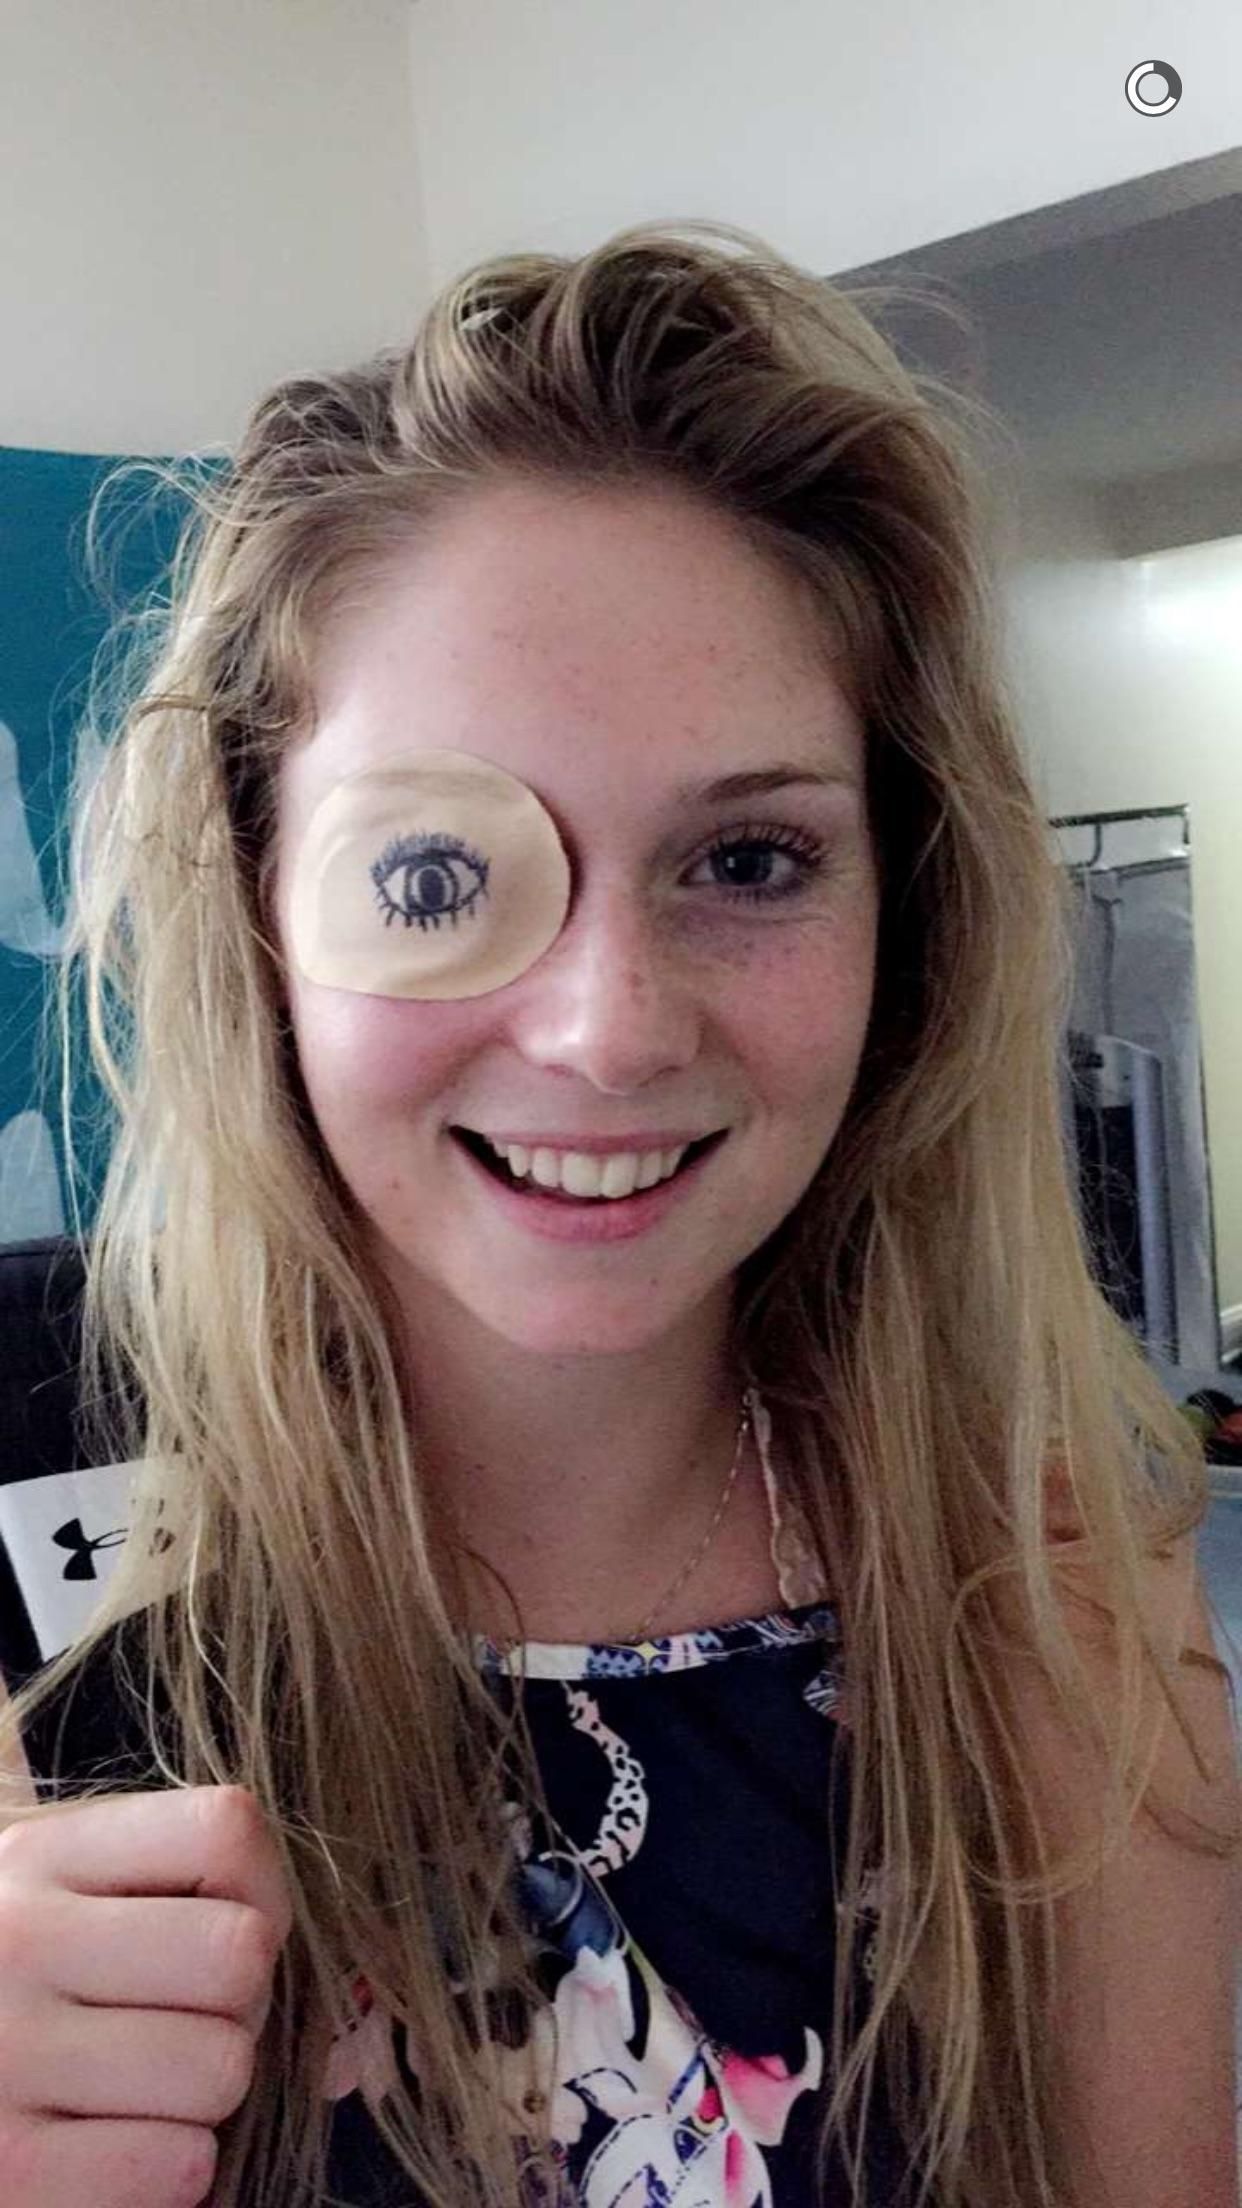 My girlfriends friend got poked in the eye and needed an eye patch. Her friends didn't want her to feel self conscious going out in public so...